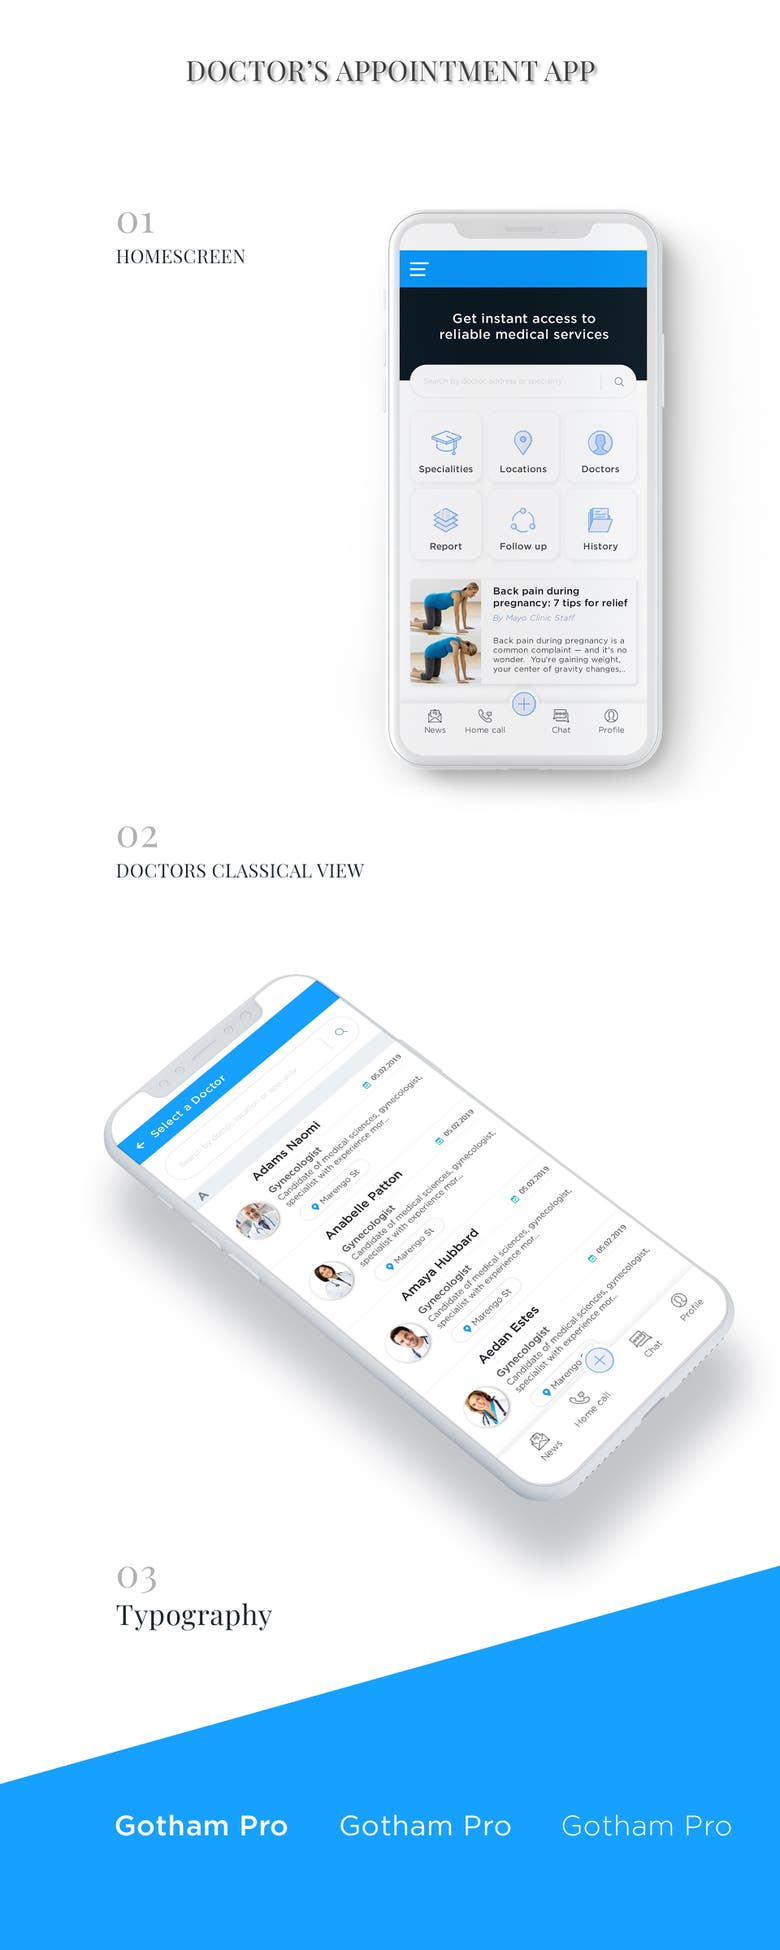 APP UI-BOOK AN APPOINTMENT DESIGN